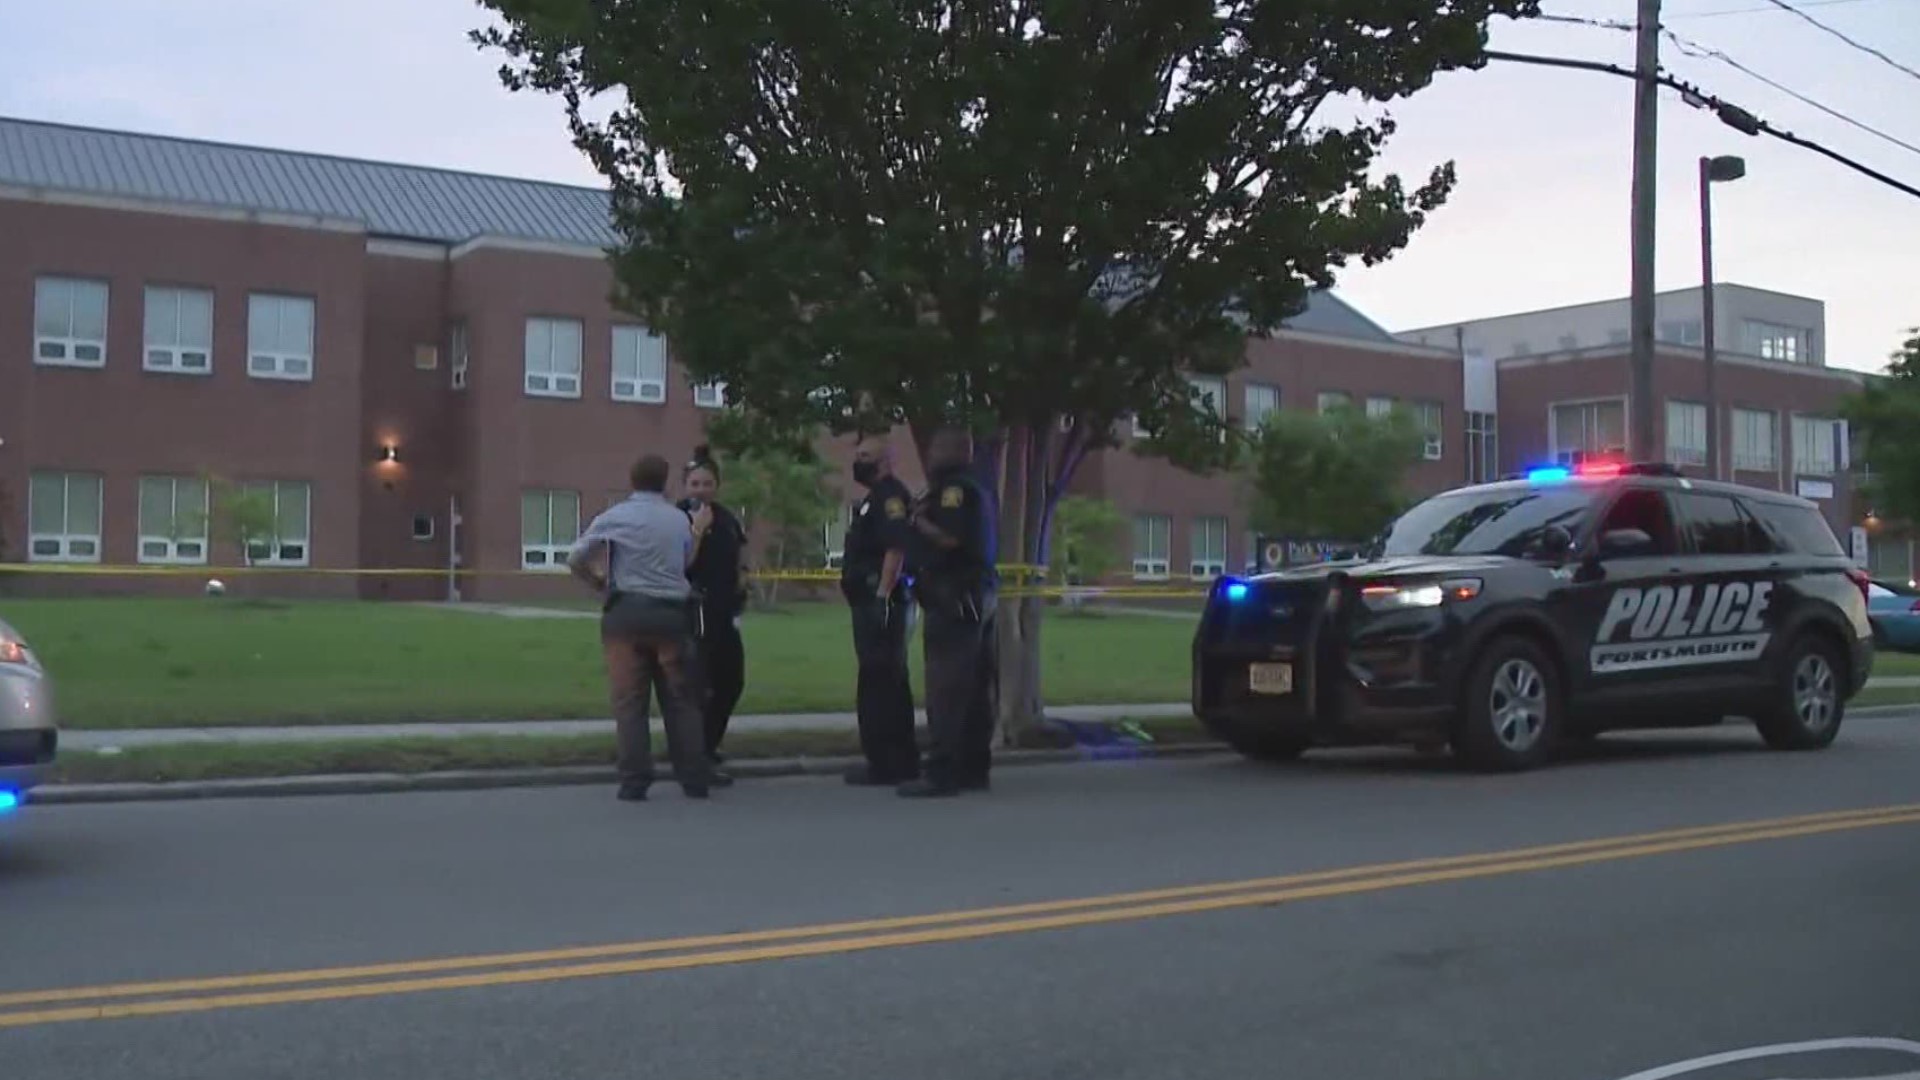 Two teens were shot Saturday near the Parkview area in Portsmouth. Police said a 14-year-old died and a 15-year-old is in critical condition.